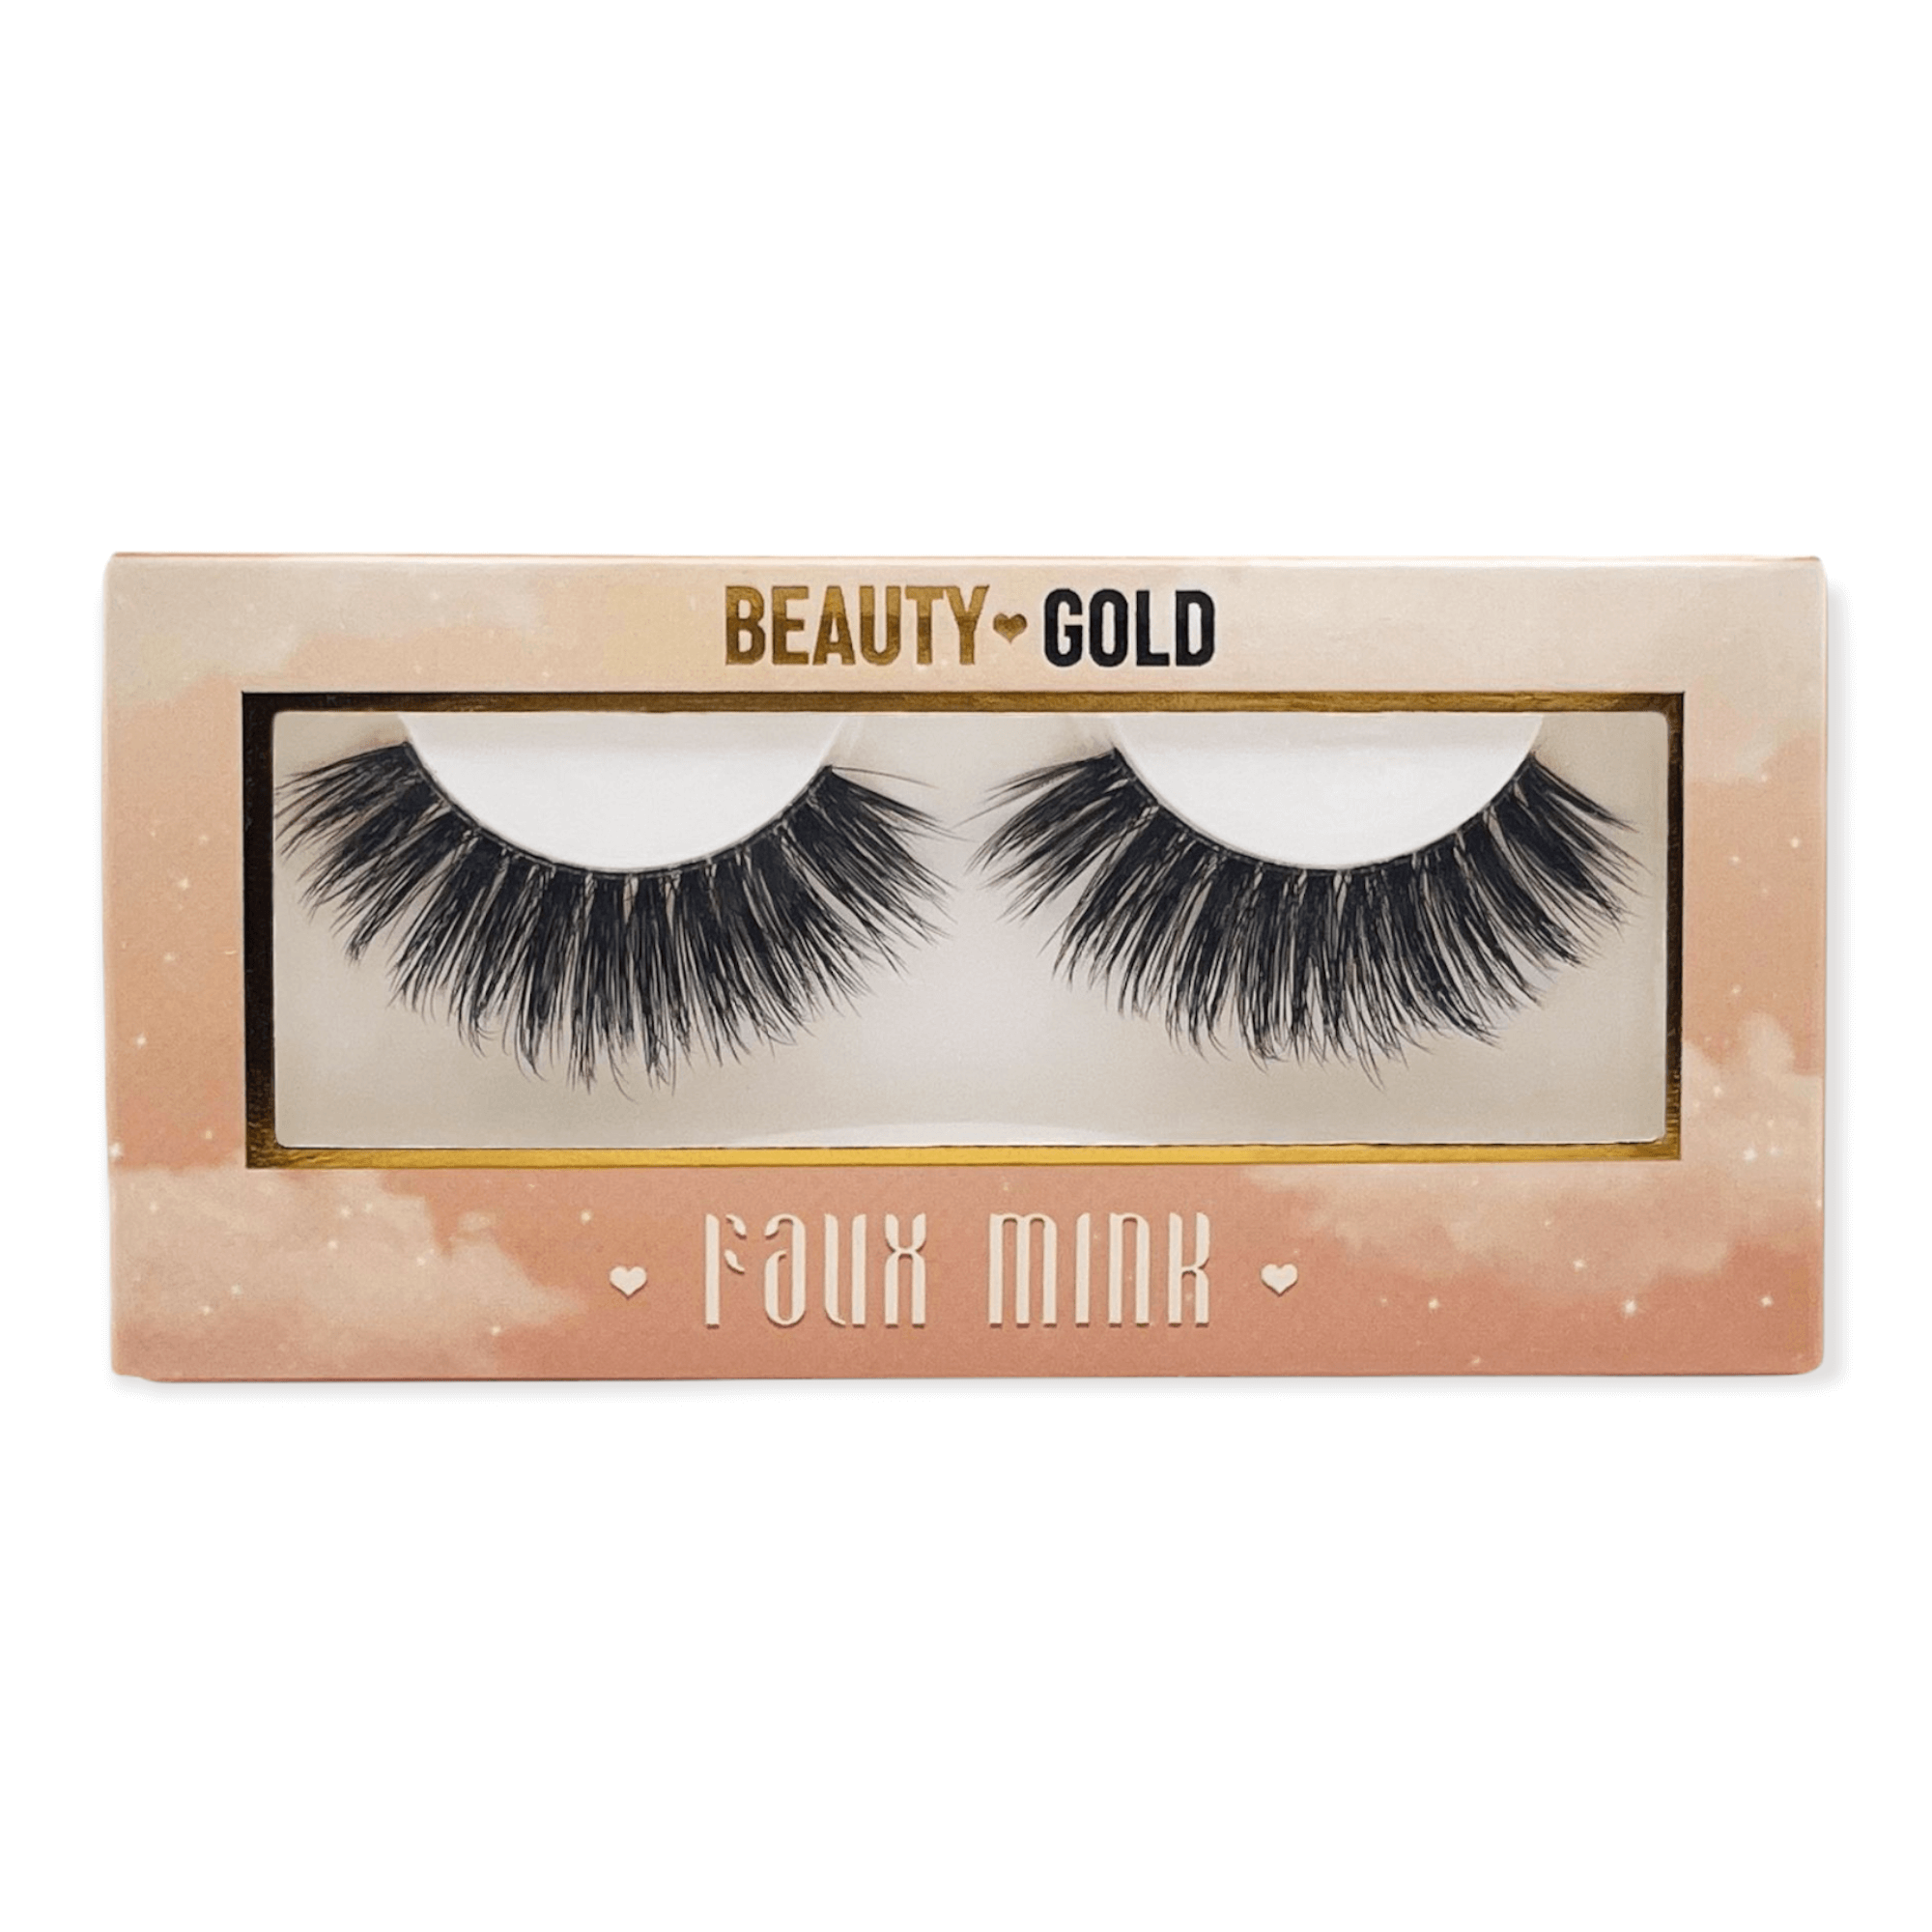 Beauty Gold - Faux Mink Lashes - Tease - Beauty Gold - LASHES